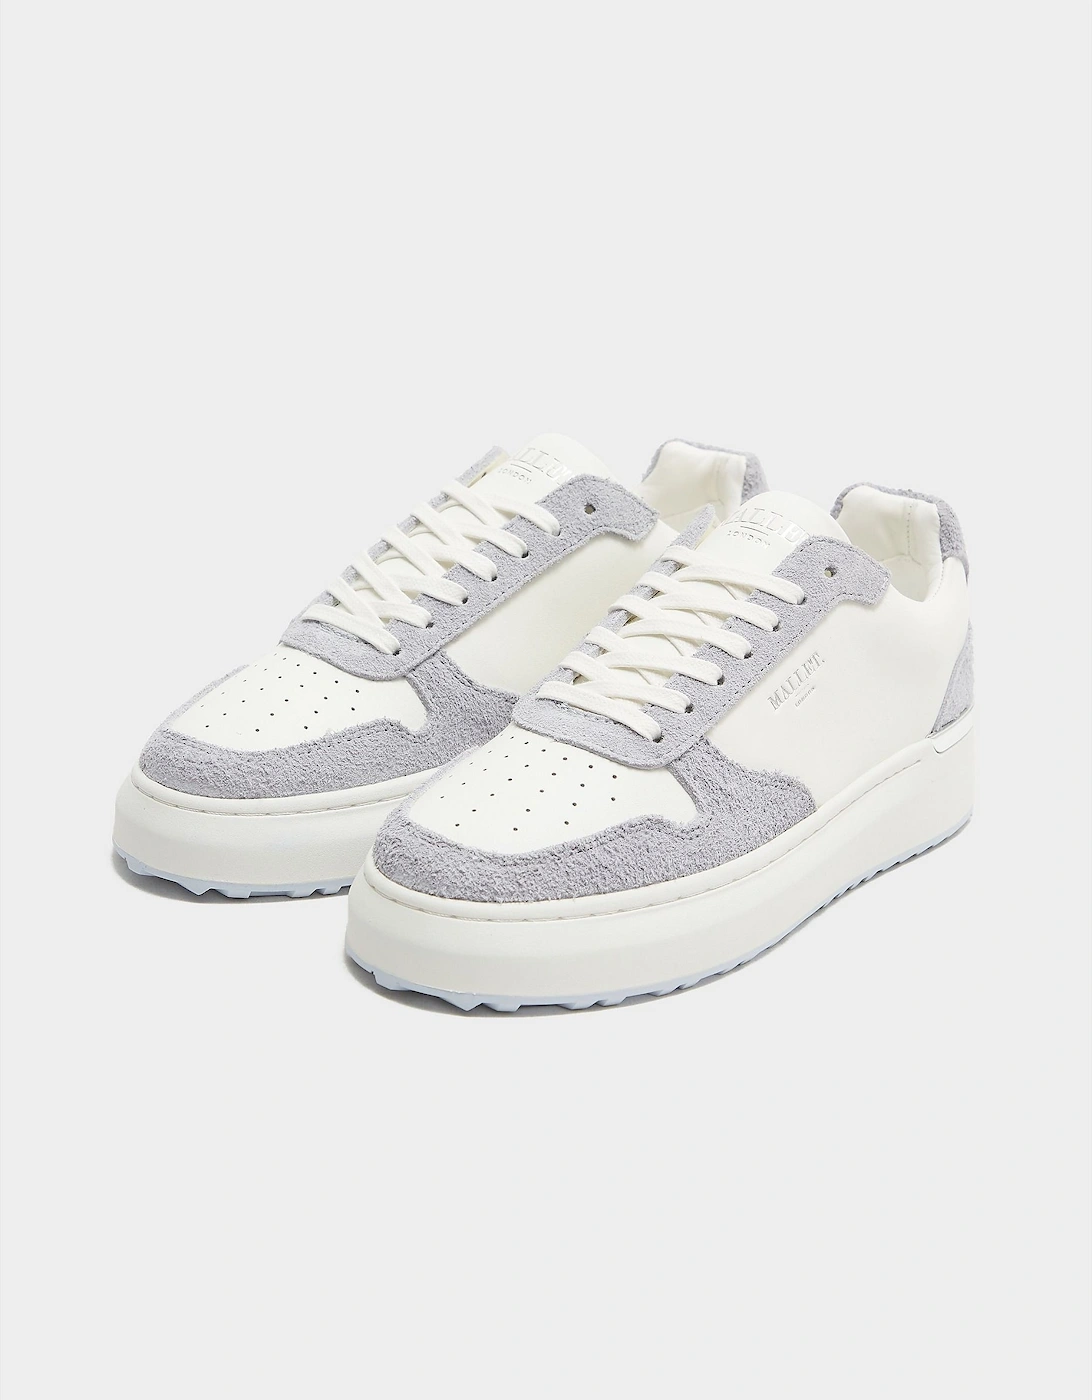 Womens Hoxton 2.0 Trainers